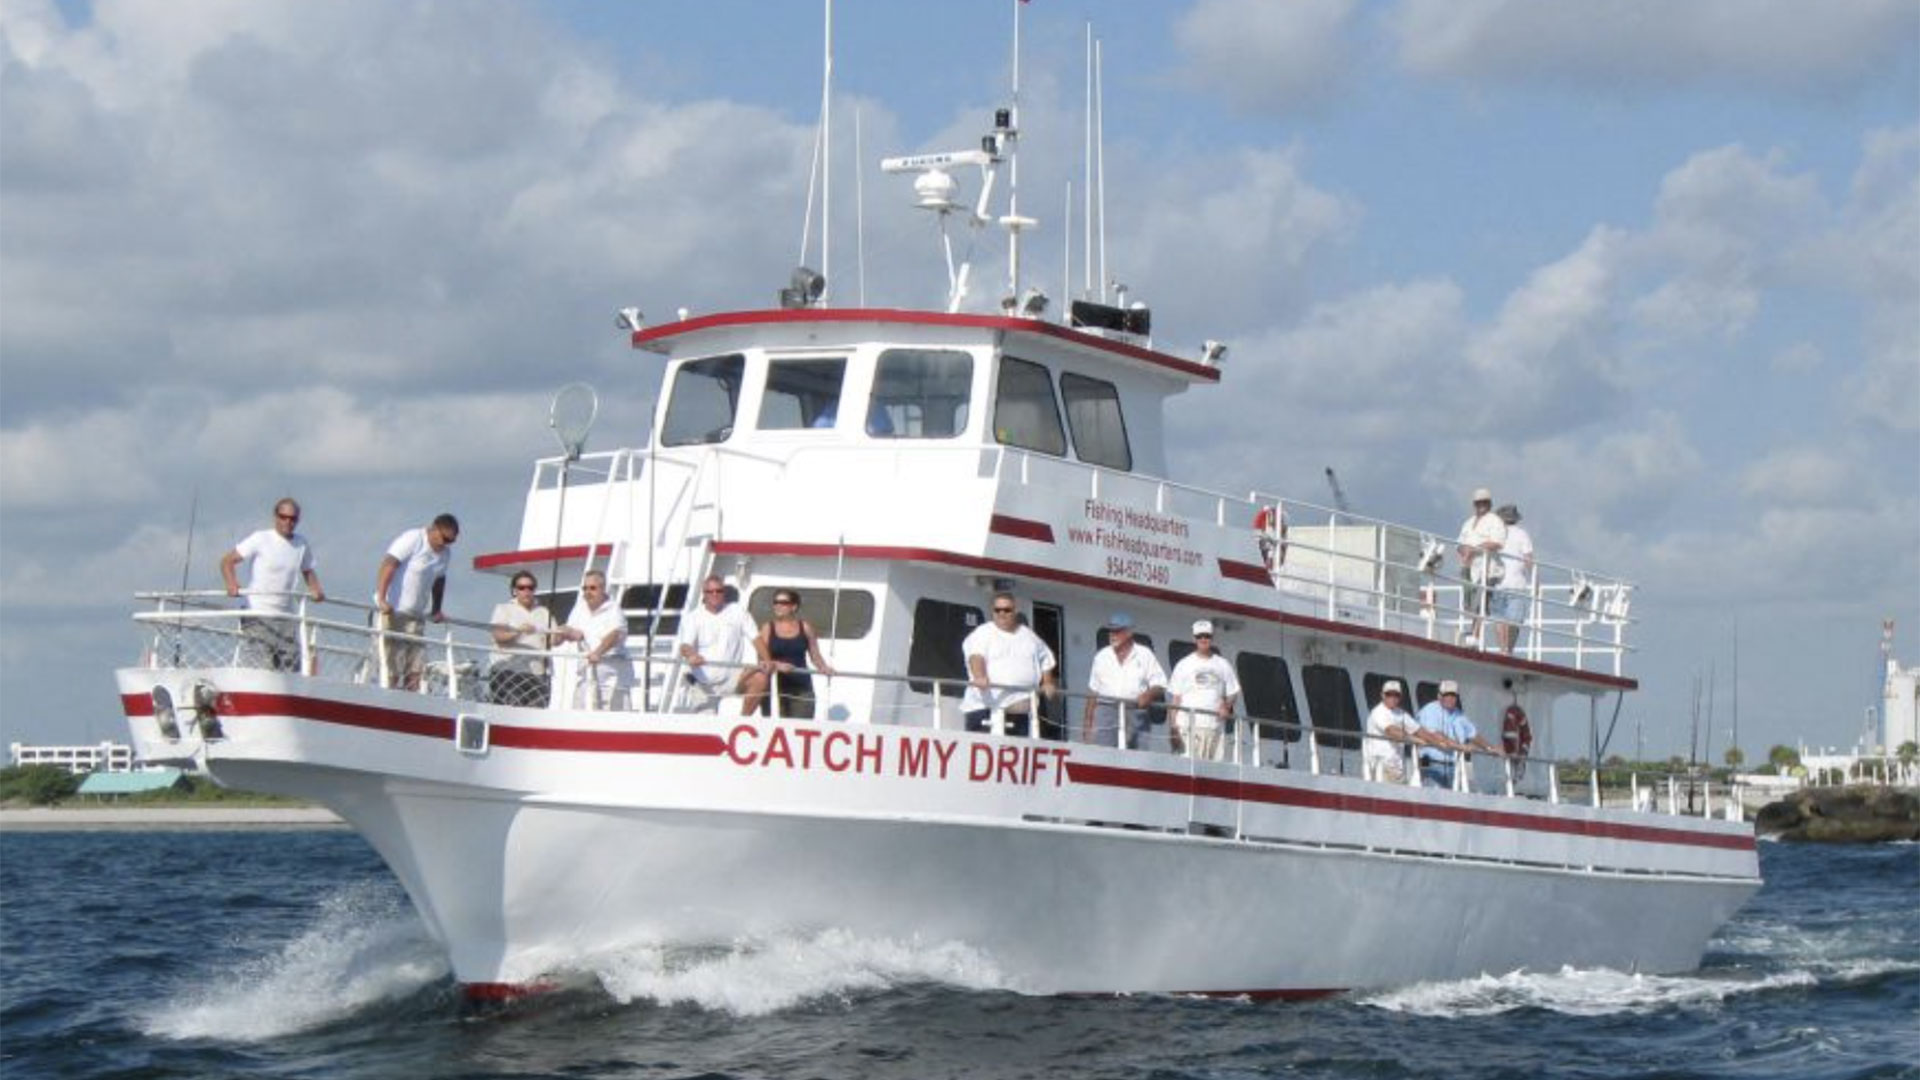 Experience a deep sea fishing excursion on the Catch My Drift.